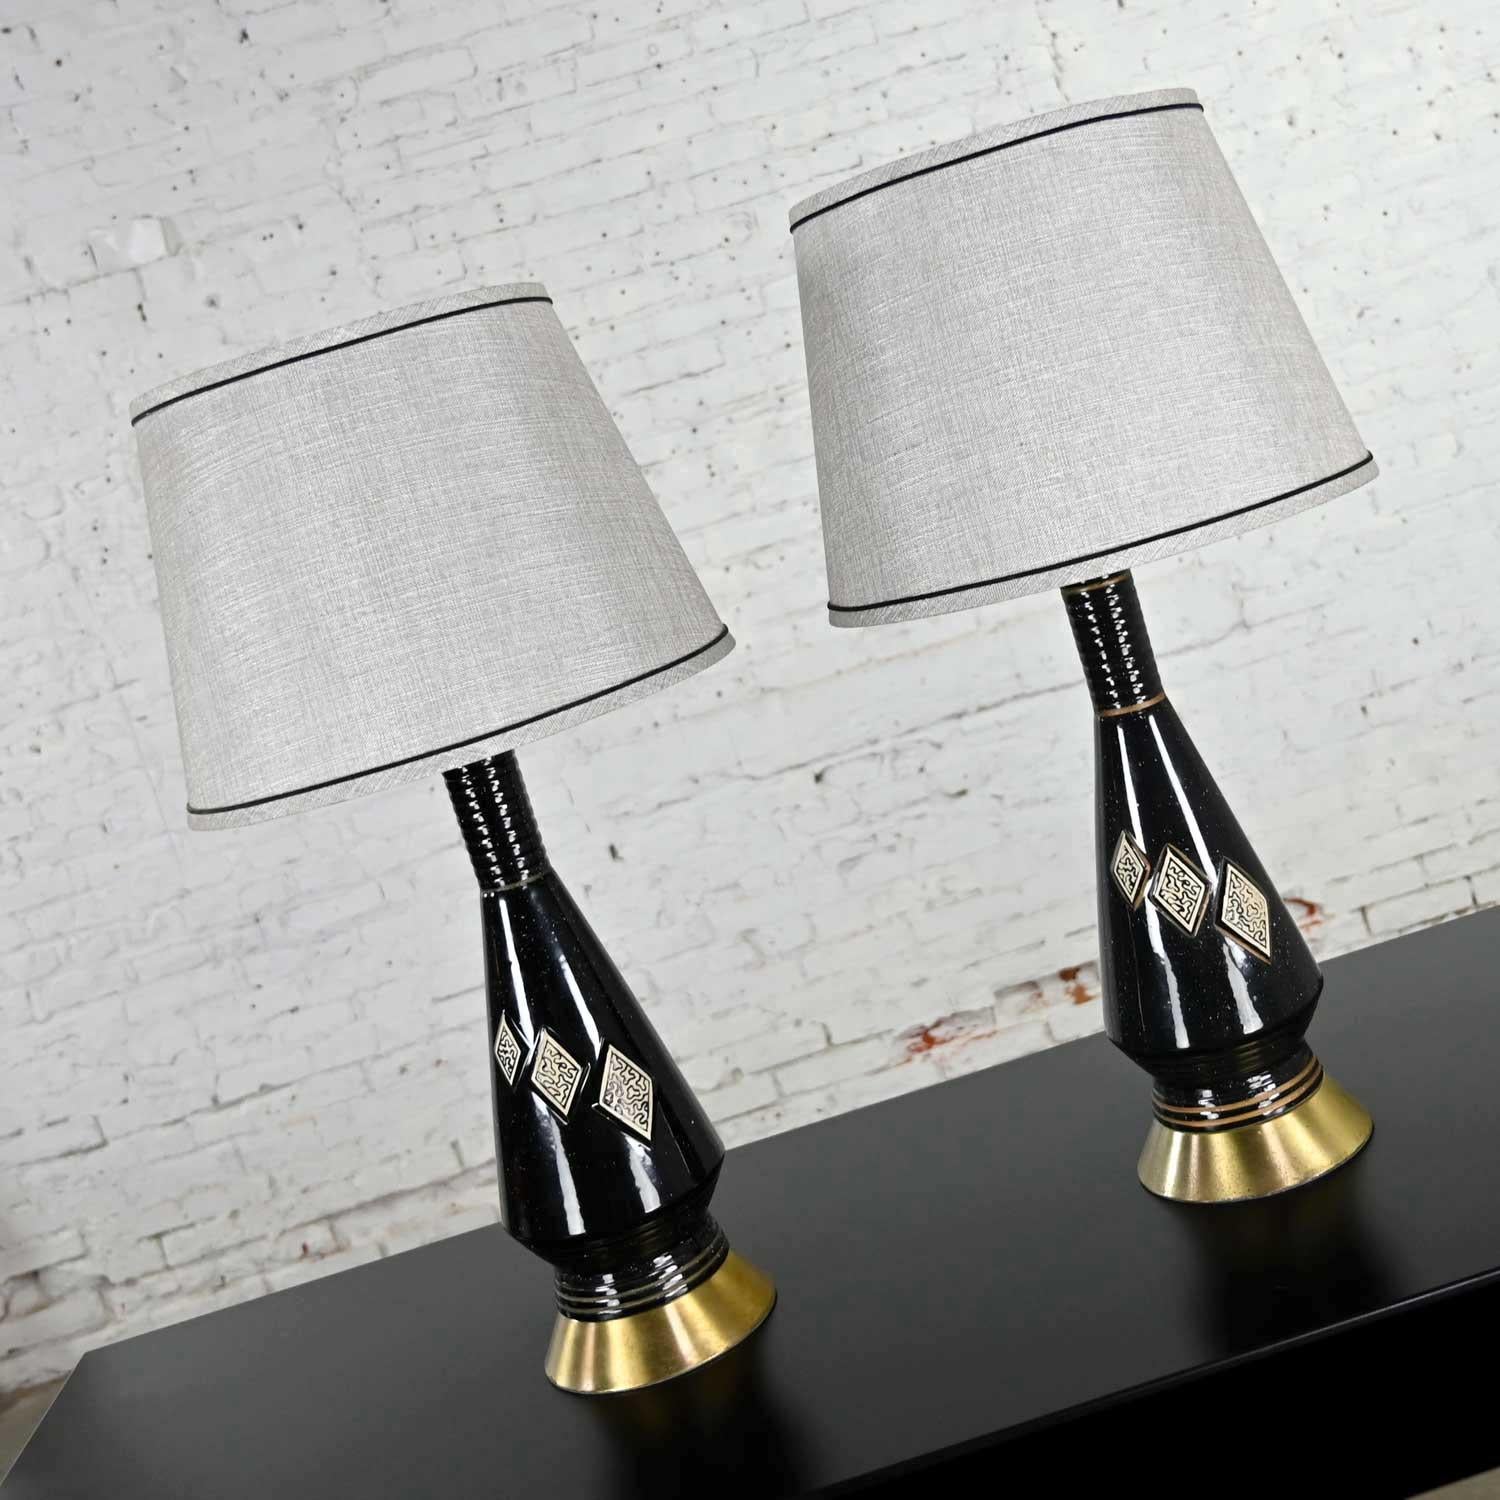 Wonderful Mid-Century Modern black ceramic lamps with harlequin diamond style designs on front and new gray tapered drum shades. Beautiful condition, keeping in mind that these are vintage and not new so will have signs of use and wear. All of the